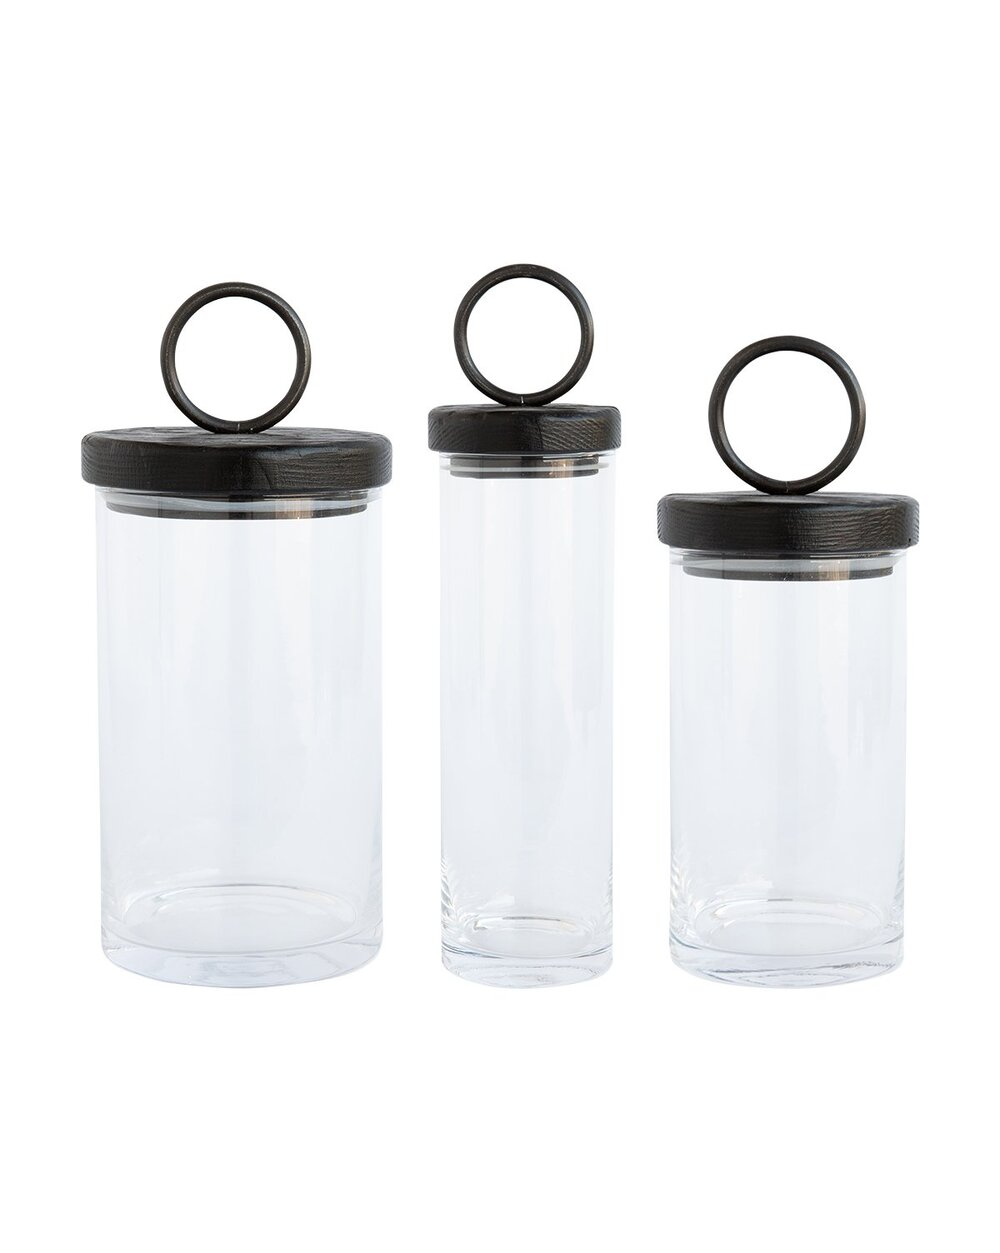 Ring_Top_Canisters_1.jpg